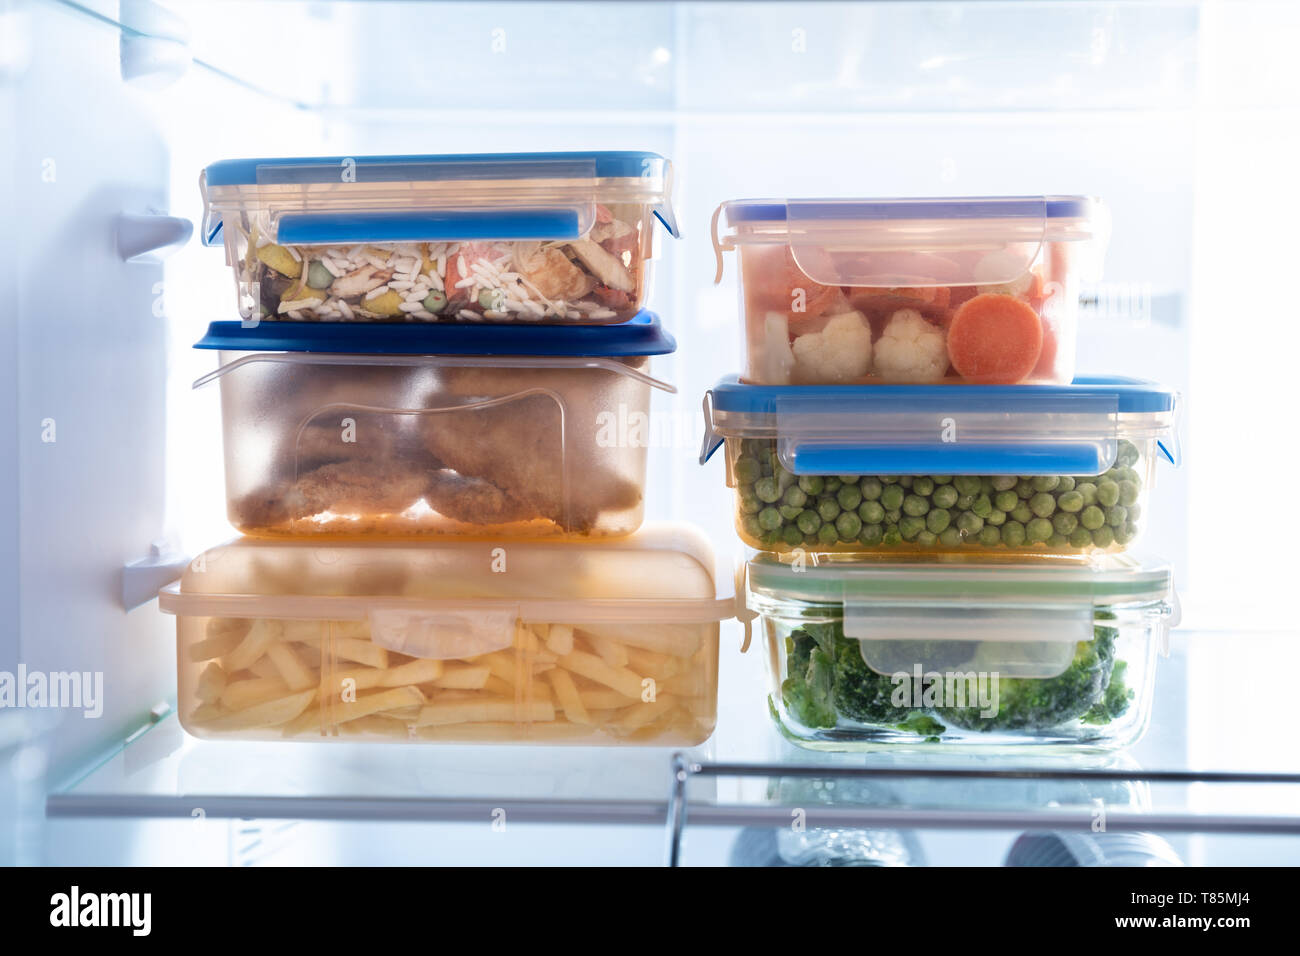 https://c8.alamy.com/comp/T85MJ4/stacked-of-plastic-containers-with-various-food-store-in-refrigerator-T85MJ4.jpg